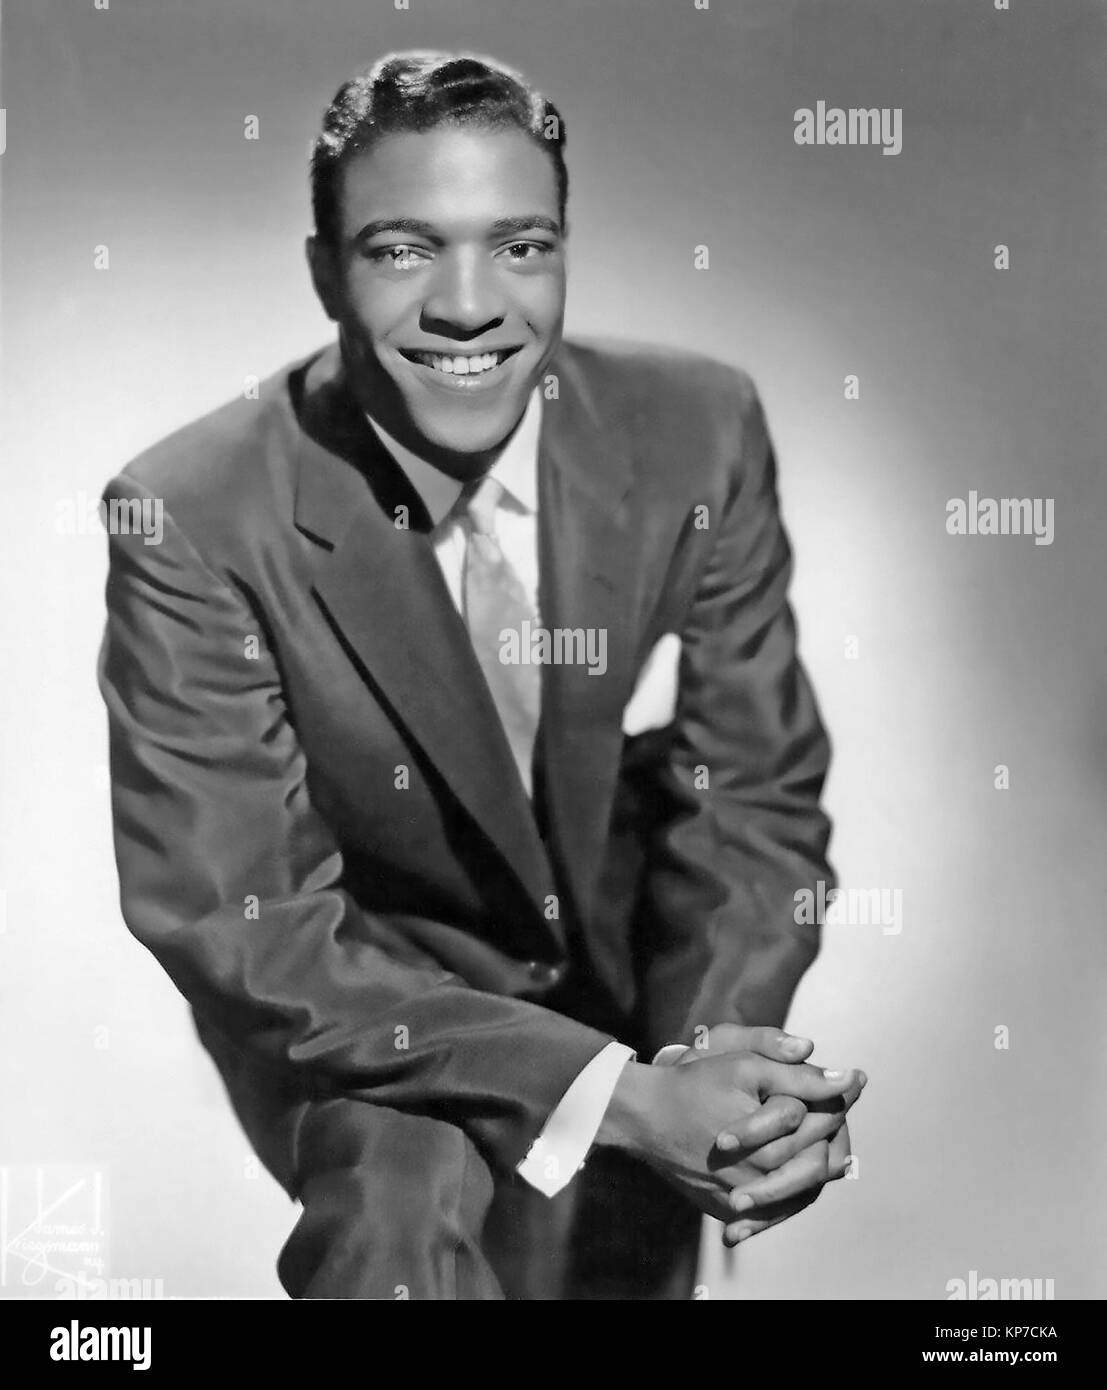 https://c8.alamy.com/comp/KP7CKA/clyde-mcphatter-1932-1972-promotional-photo-of-american-singer-about-KP7CKA.jpg